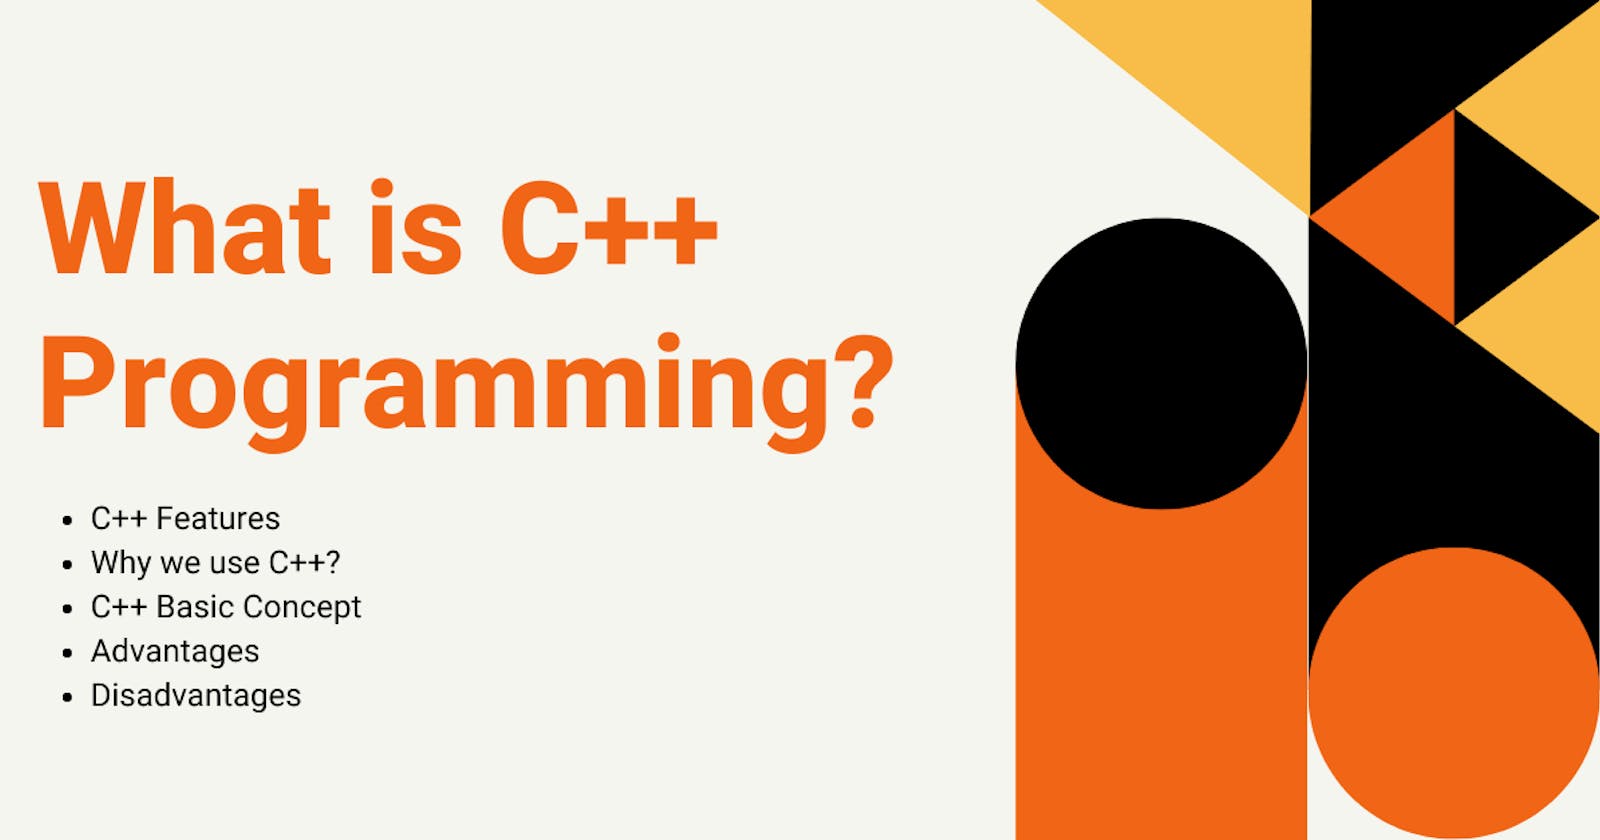 What is C++ Programming?